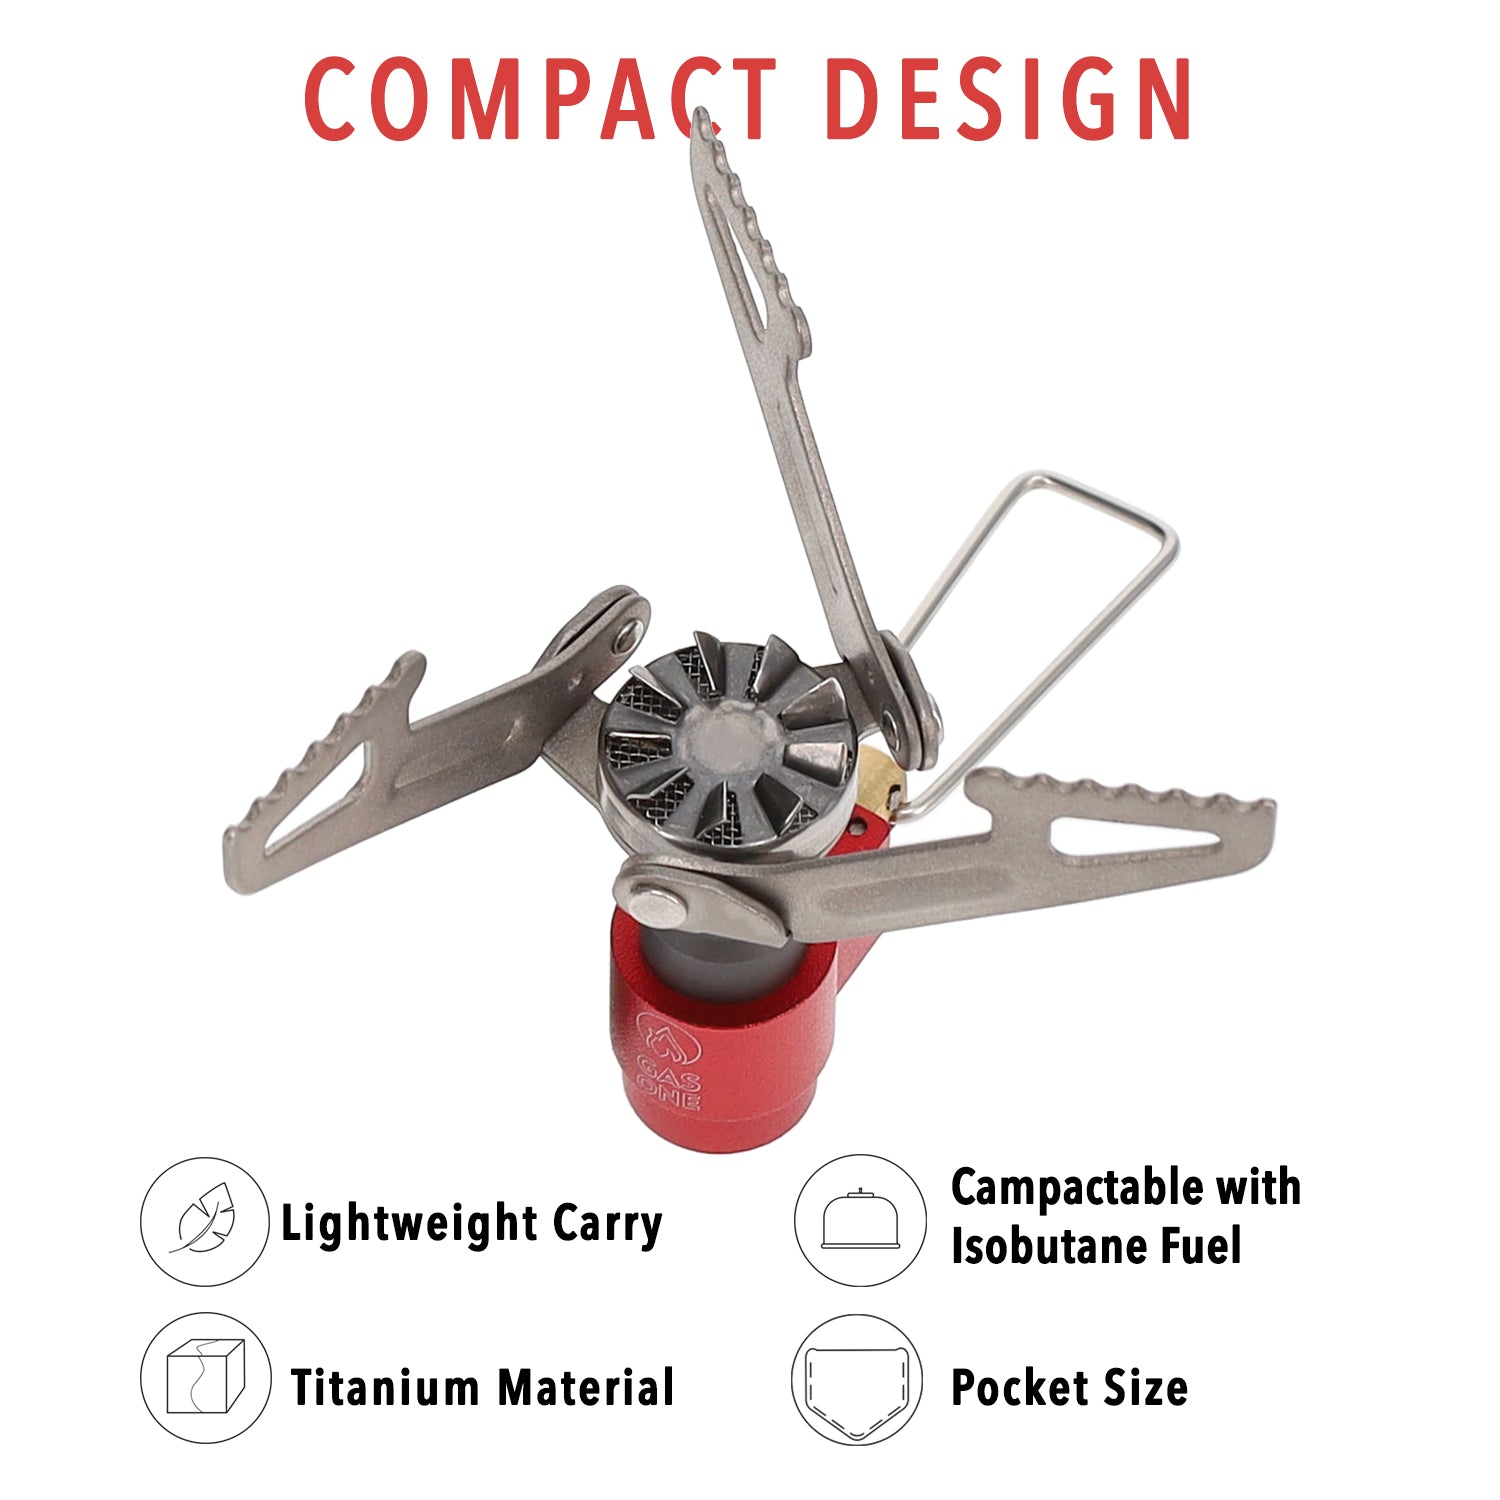 Gas One Camp Stove Backpacking Stove, Titanium Alloy Ultra-Light, 0.05lb Lightest Portable Stove, Pocket Rocket Stove for Backpacking, Hiking, Survival